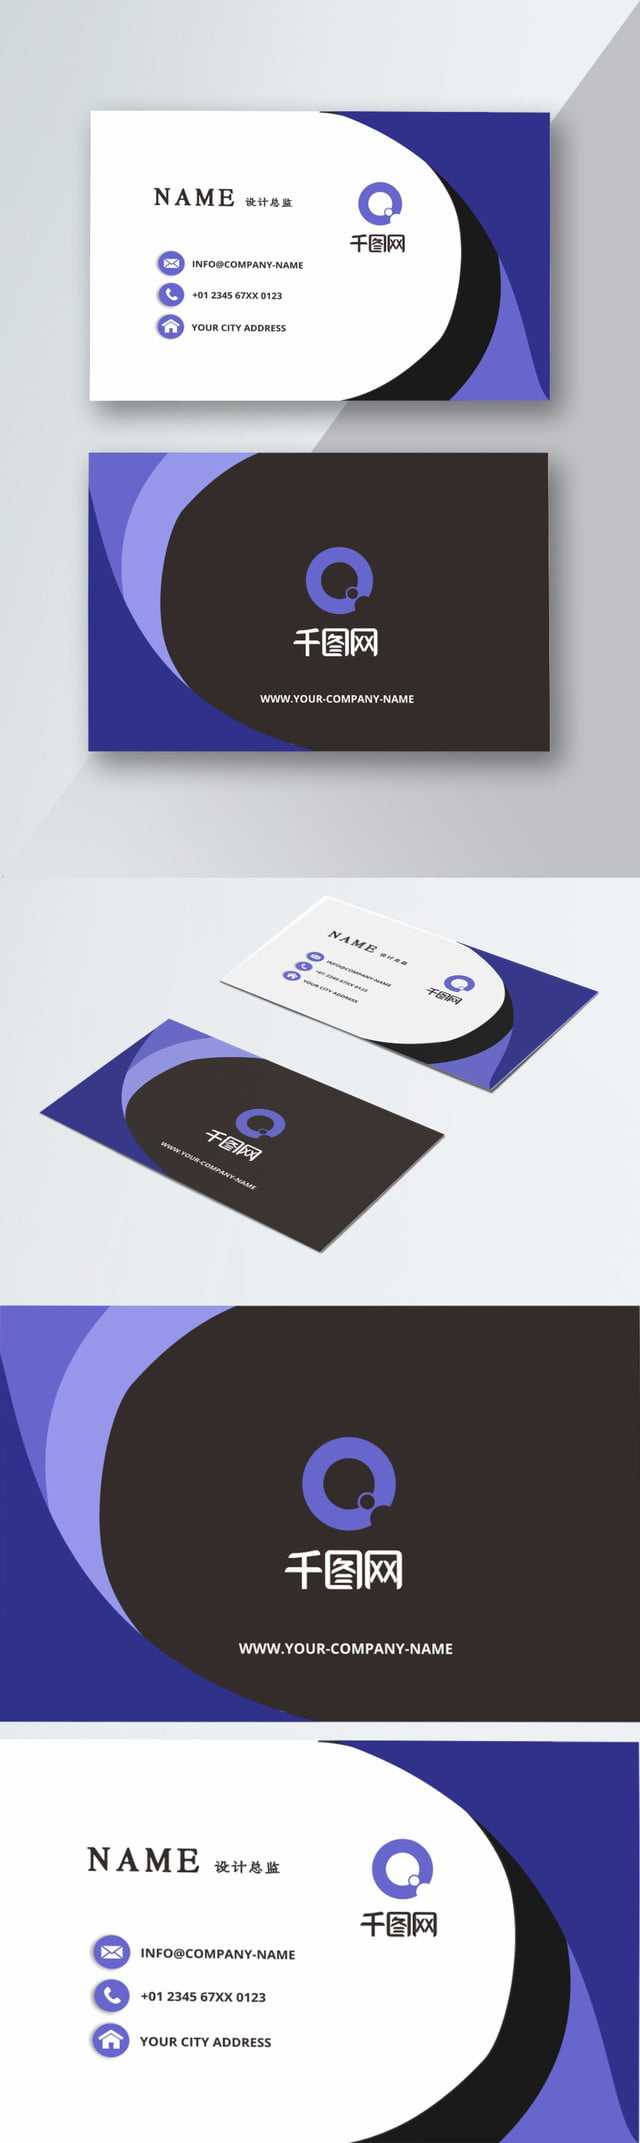 Advertising Business Card Template Business Card Design With Advertising Card Template